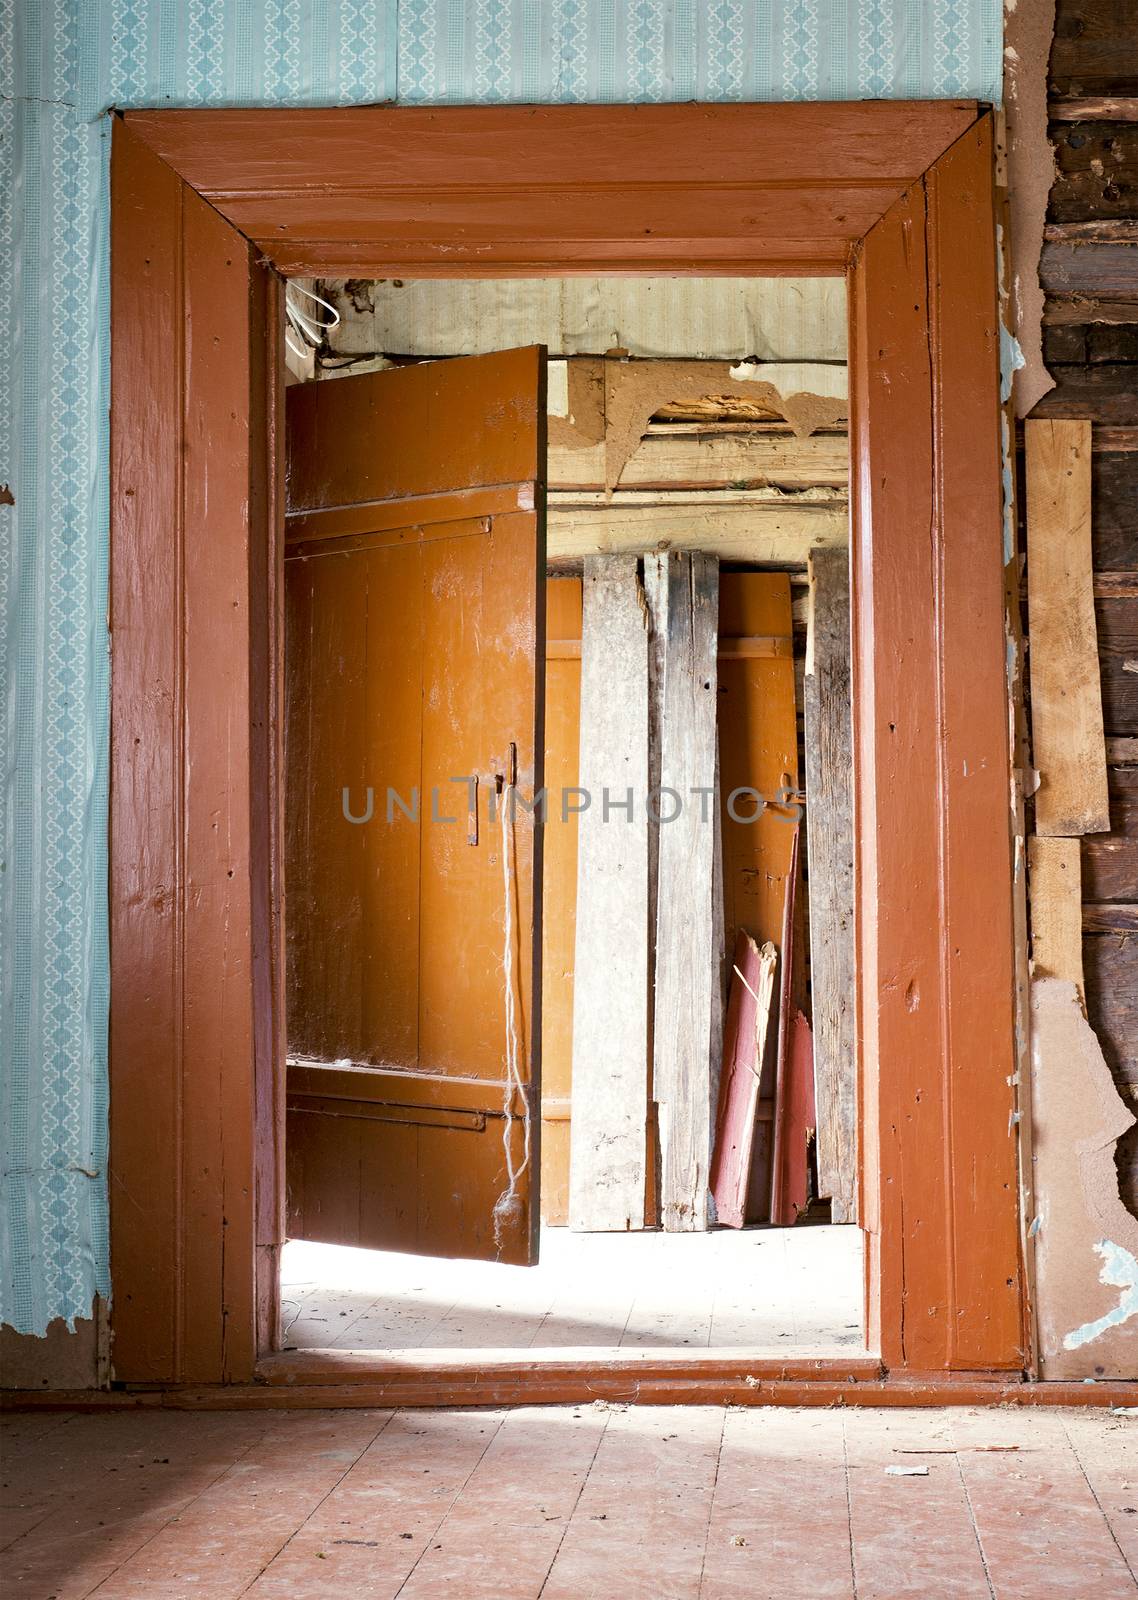 abandoned very old wooden house interior background